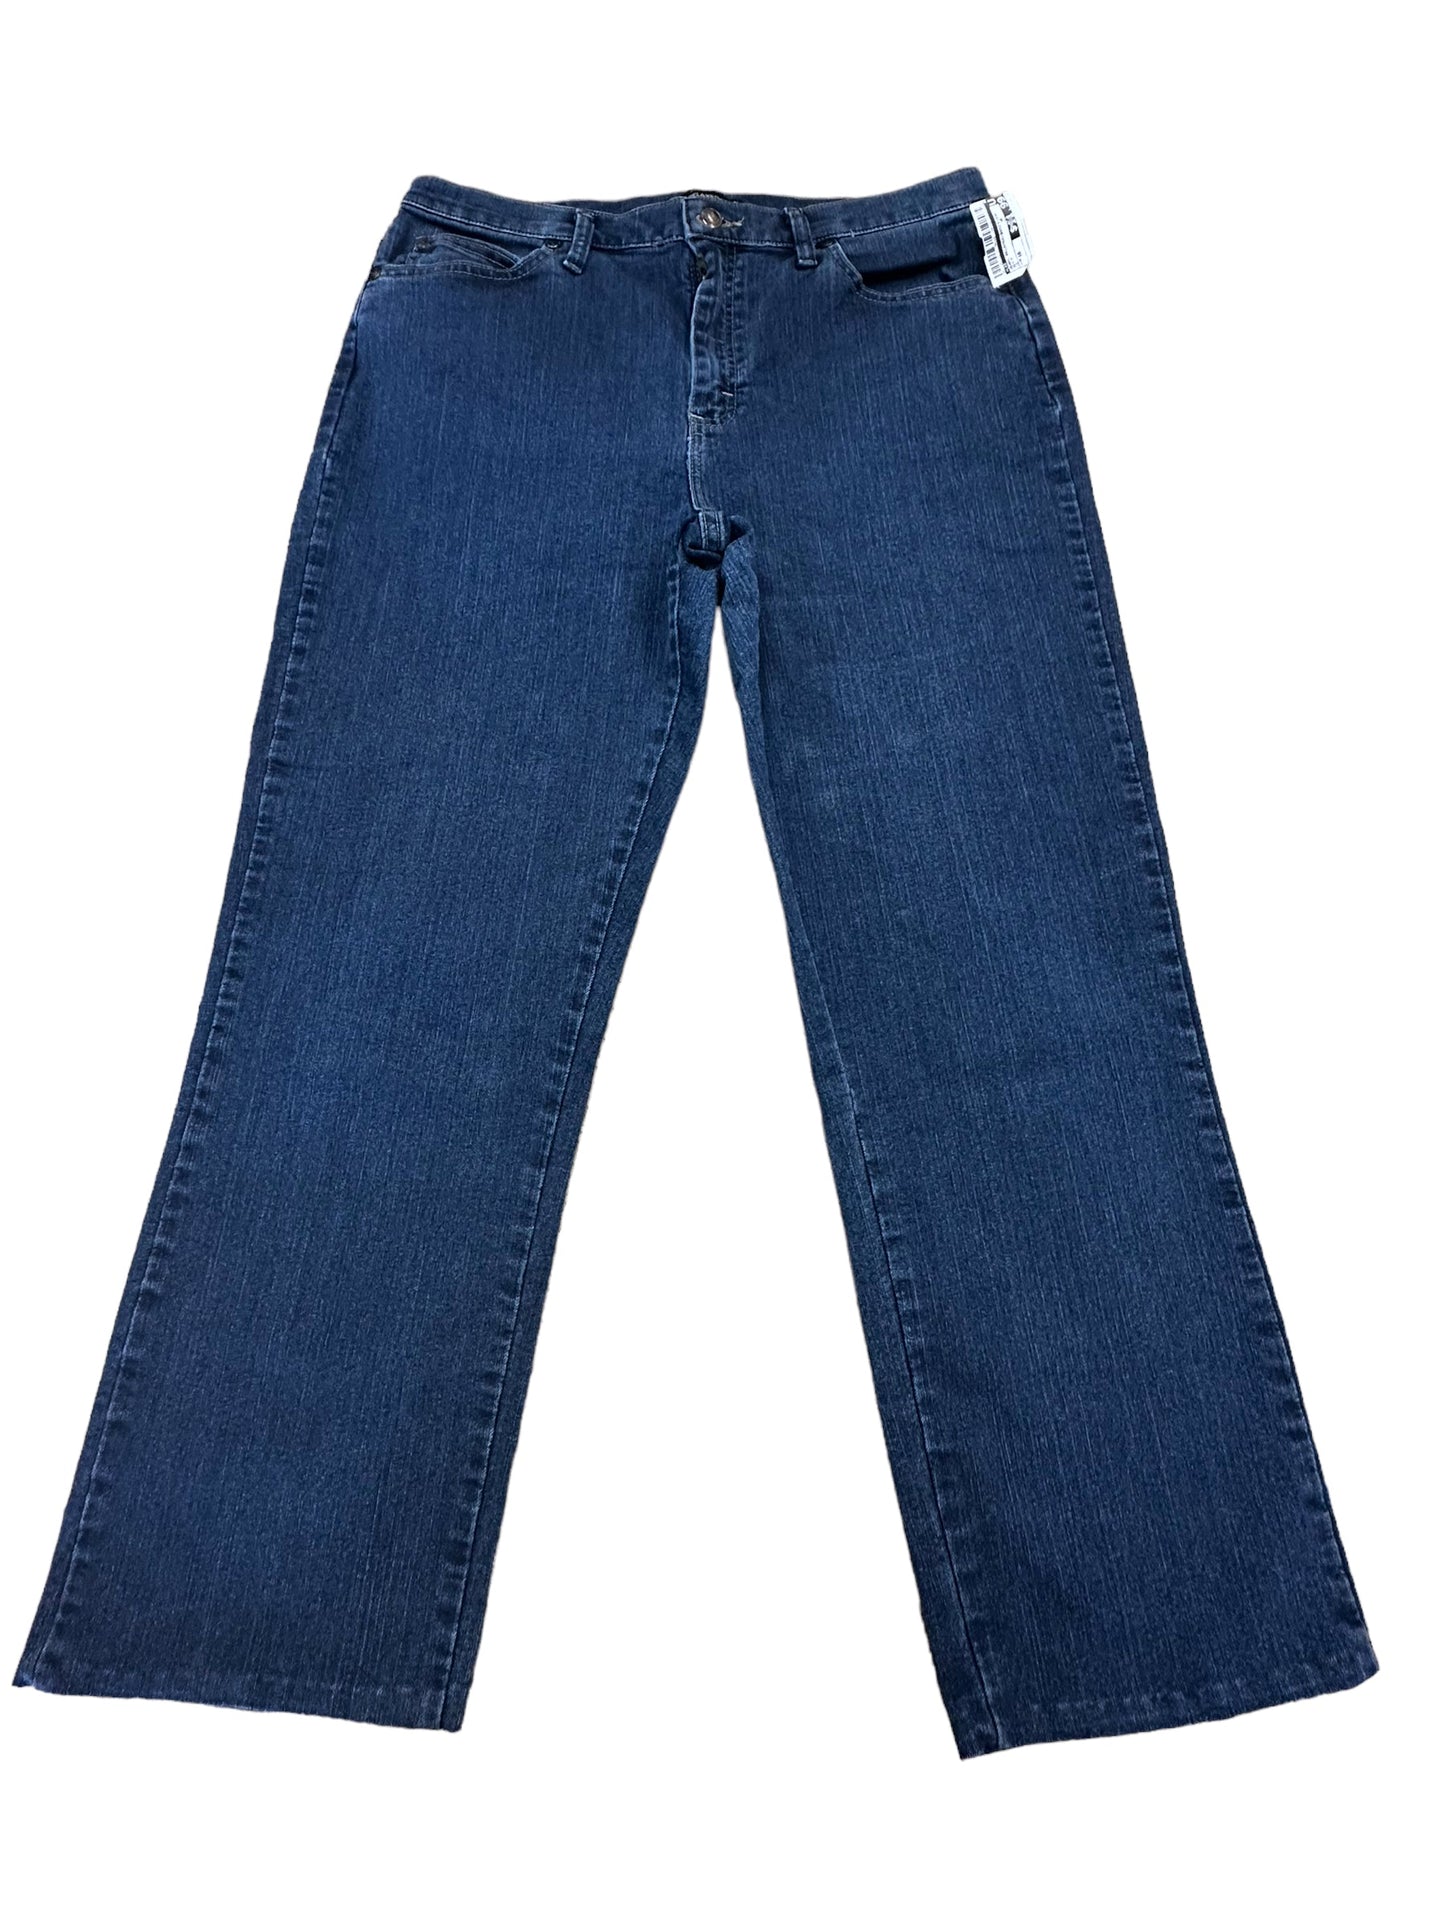 Jeans Relaxed/boyfriend By Lee  Size: 16